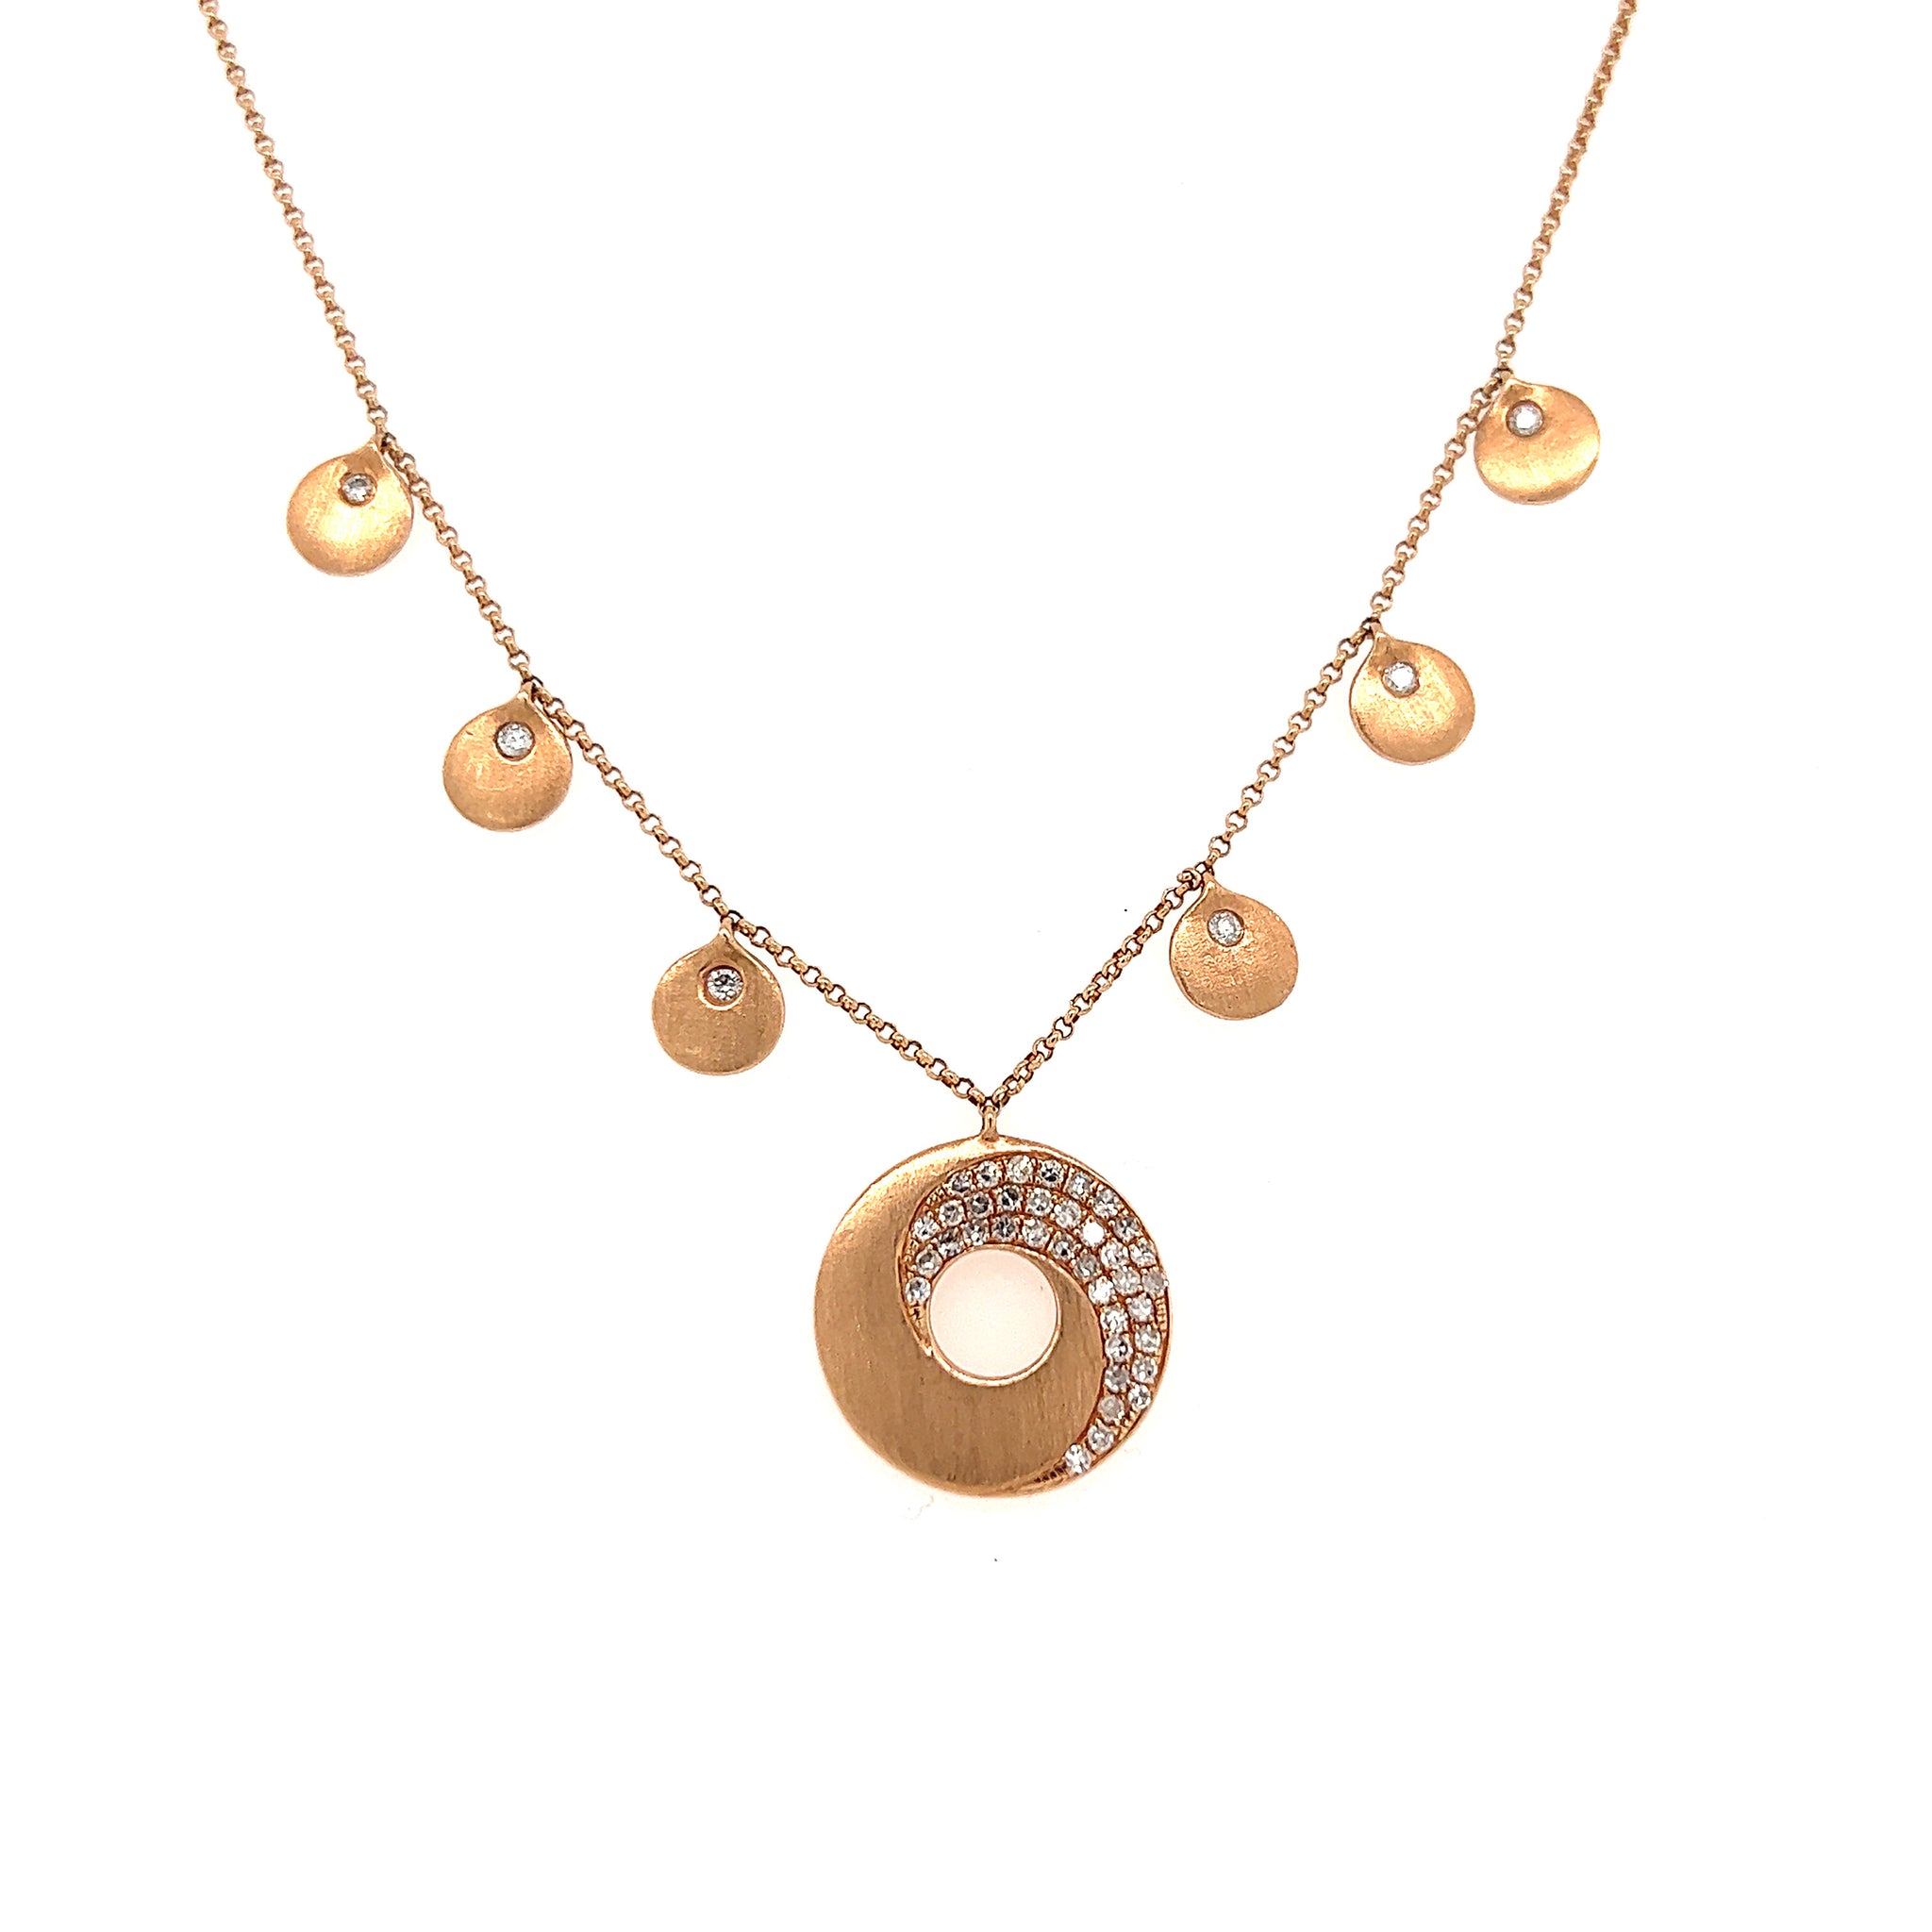 Ring of Harmony Necklace - 14k Yellow Gold - 16.5